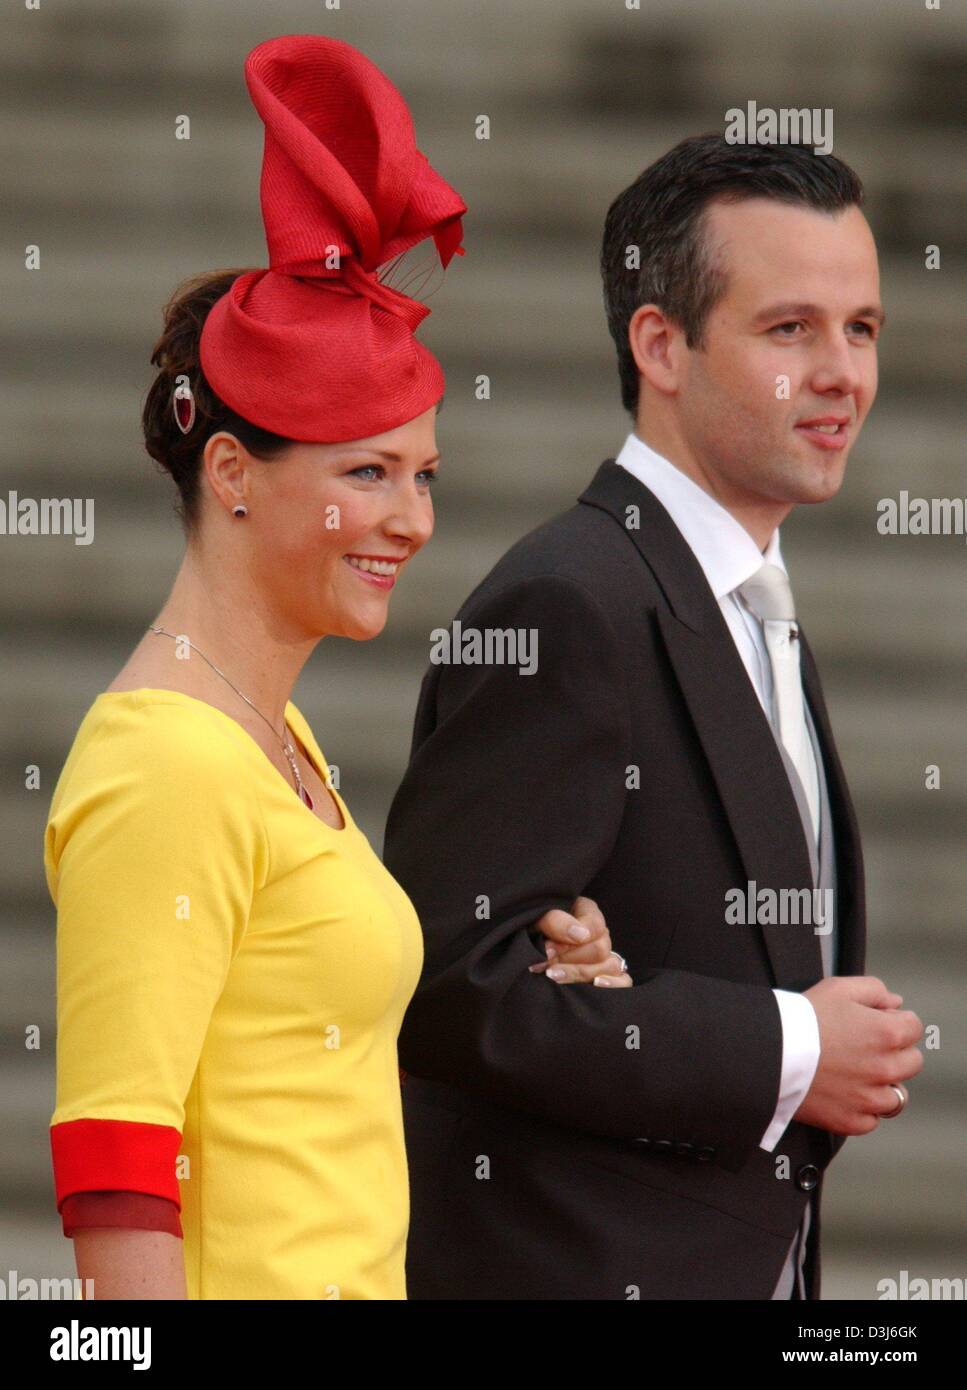 (dpa) - Princess Maertha-Louise of Norway (L) and husband Ari Behn smile as they arrive at the Almudena Cathedral for the wedding of Spanish crown prince Felipe and Letizia Ortiz in Madrid, Spain, Saturday 22 May 2004. Stock Photo